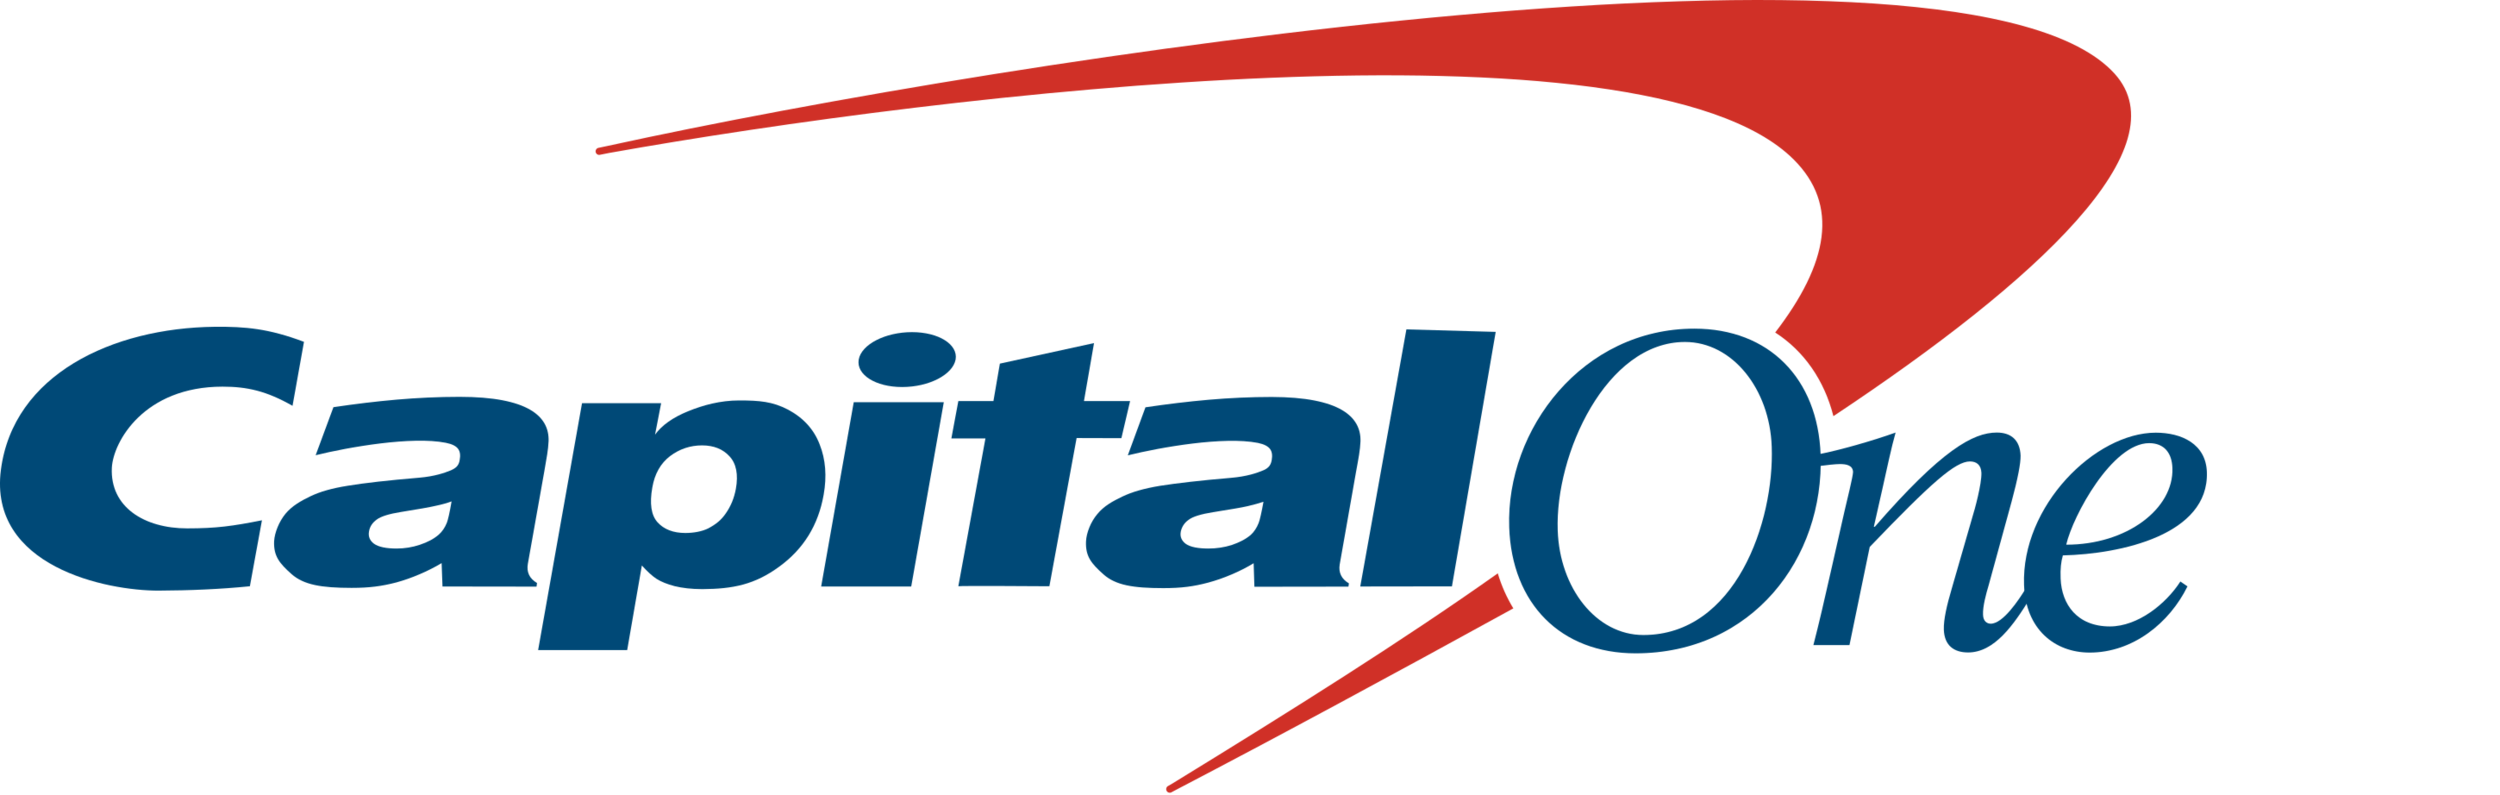 Capital_One_logo.png